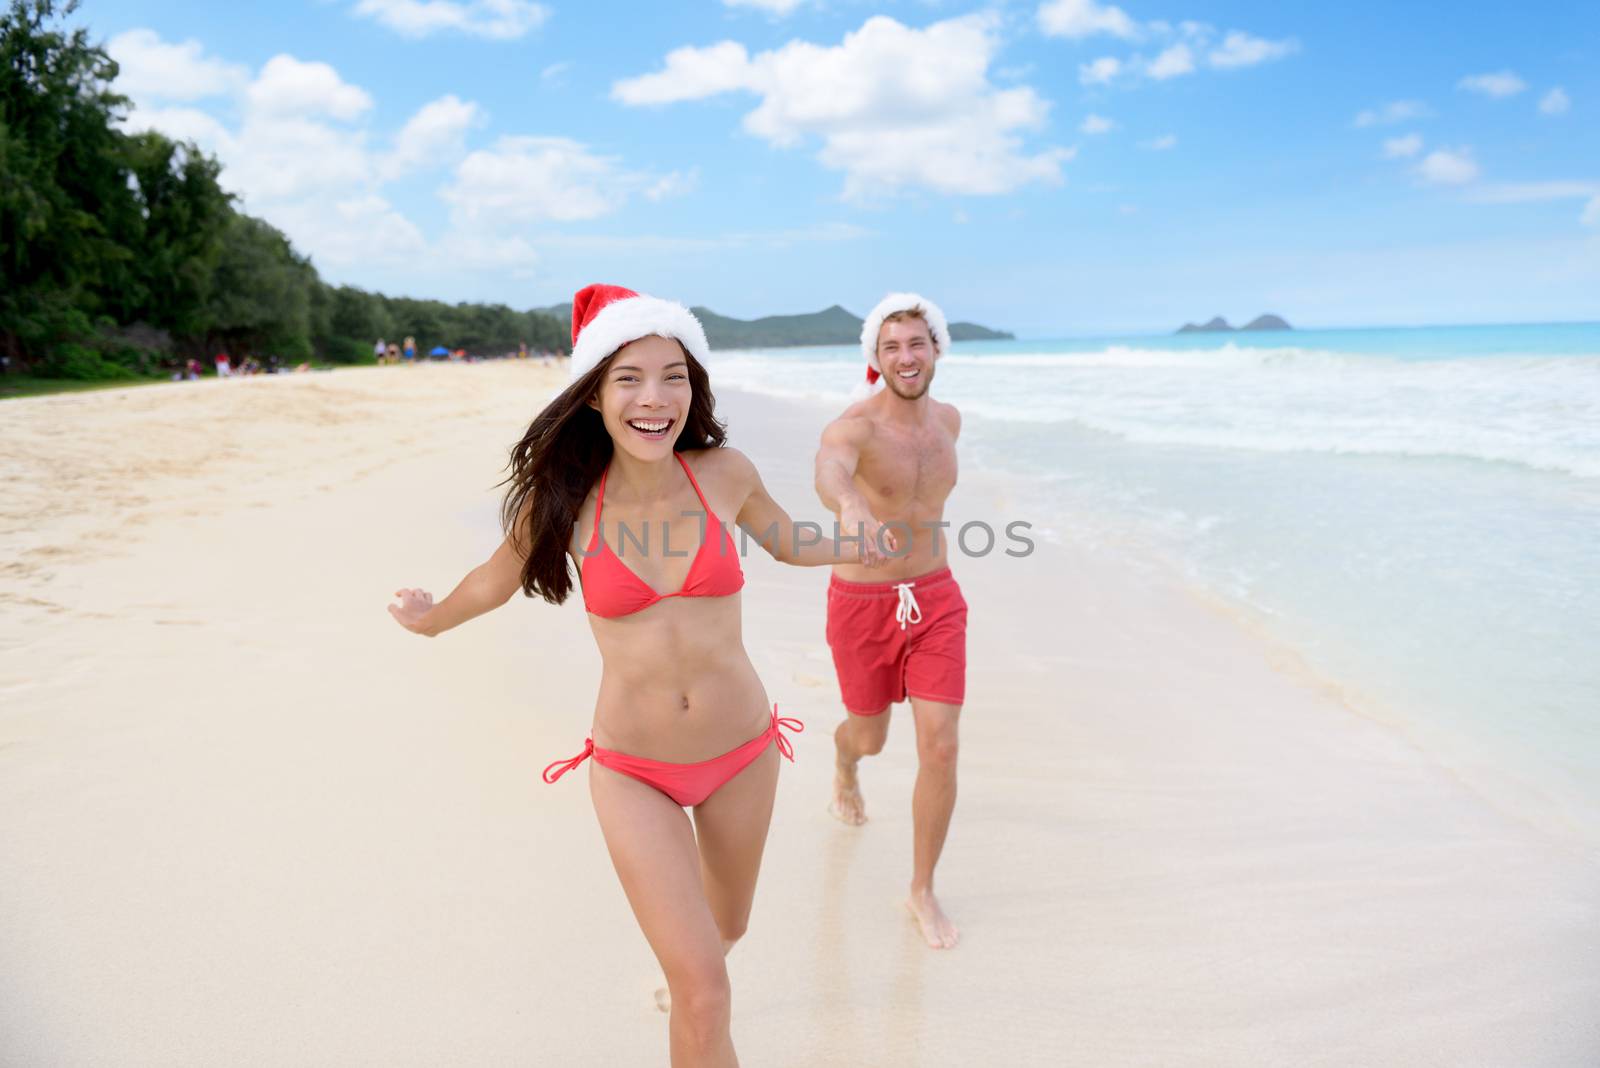 Christmas couple happy relaxing on white sand beach running on sand in bikini and swimsuit. Asian woman and man holding hands running playing during travel holidays.